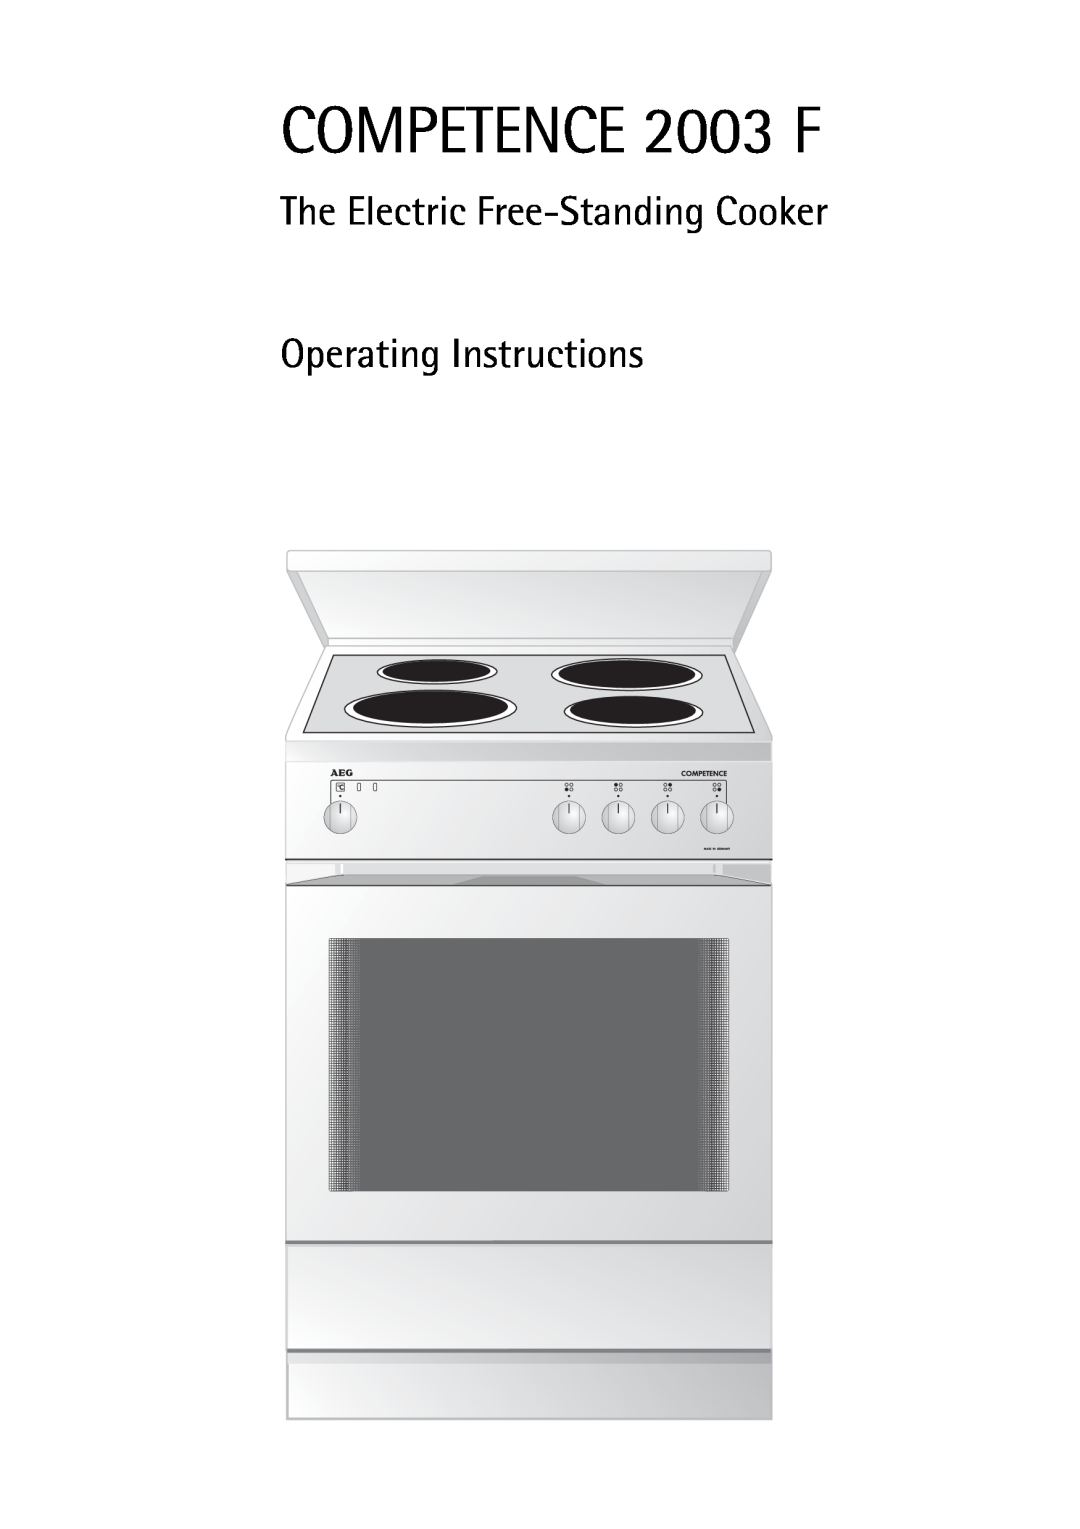 AEG operating instructions COMPETENCE 2003 F, The Electric Free-Standing Cooker Operating Instructions 